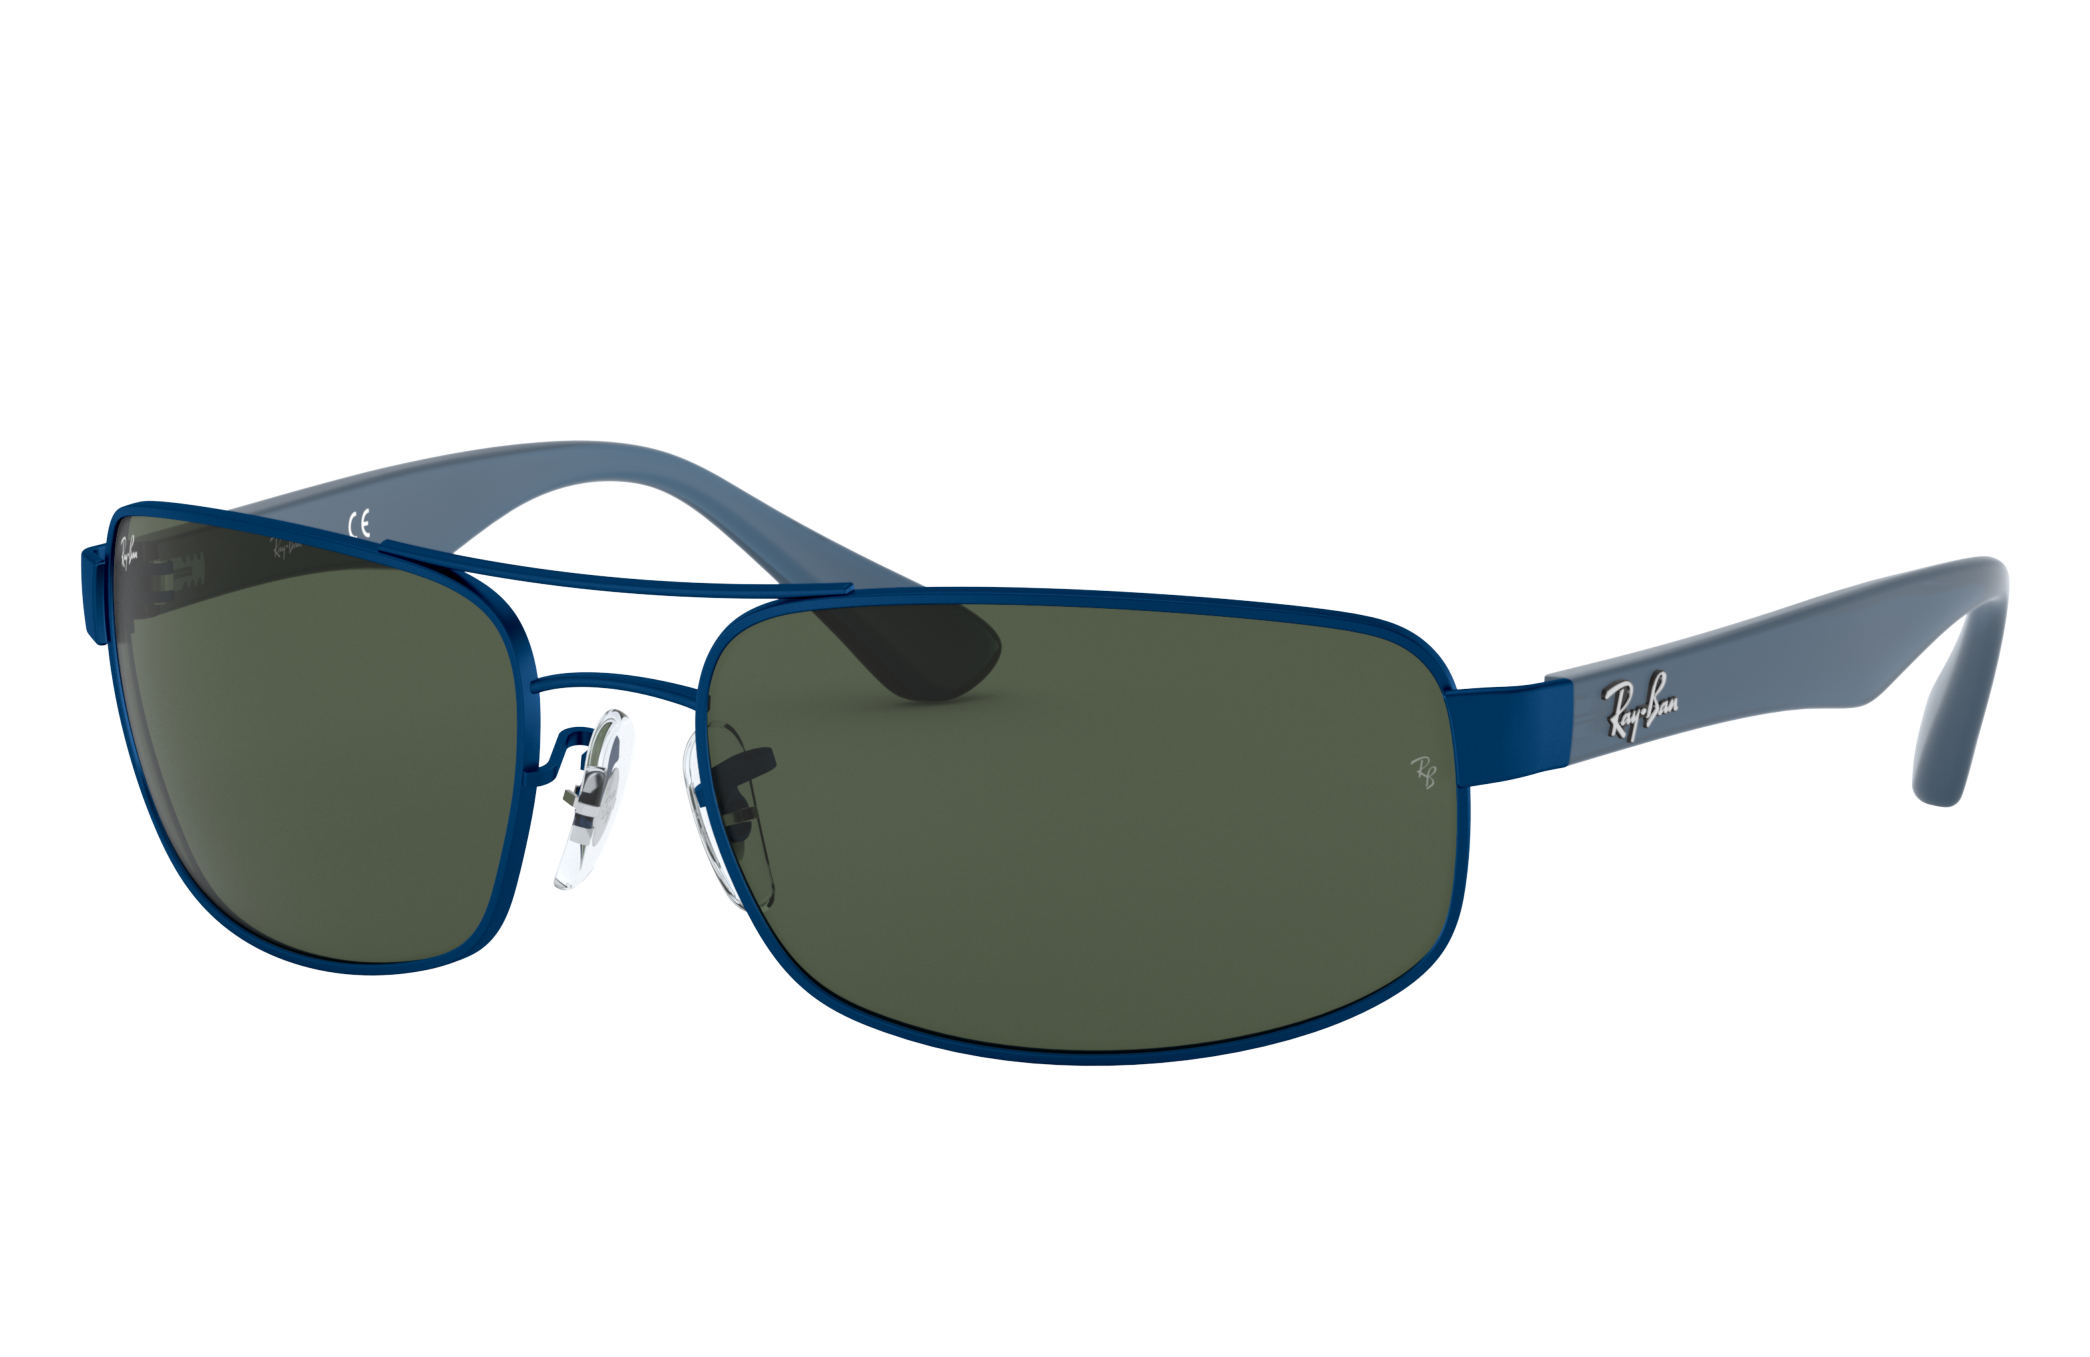 Rb3445 Sunglasses in Blue and Green - RB3445 | Ray-Ban®